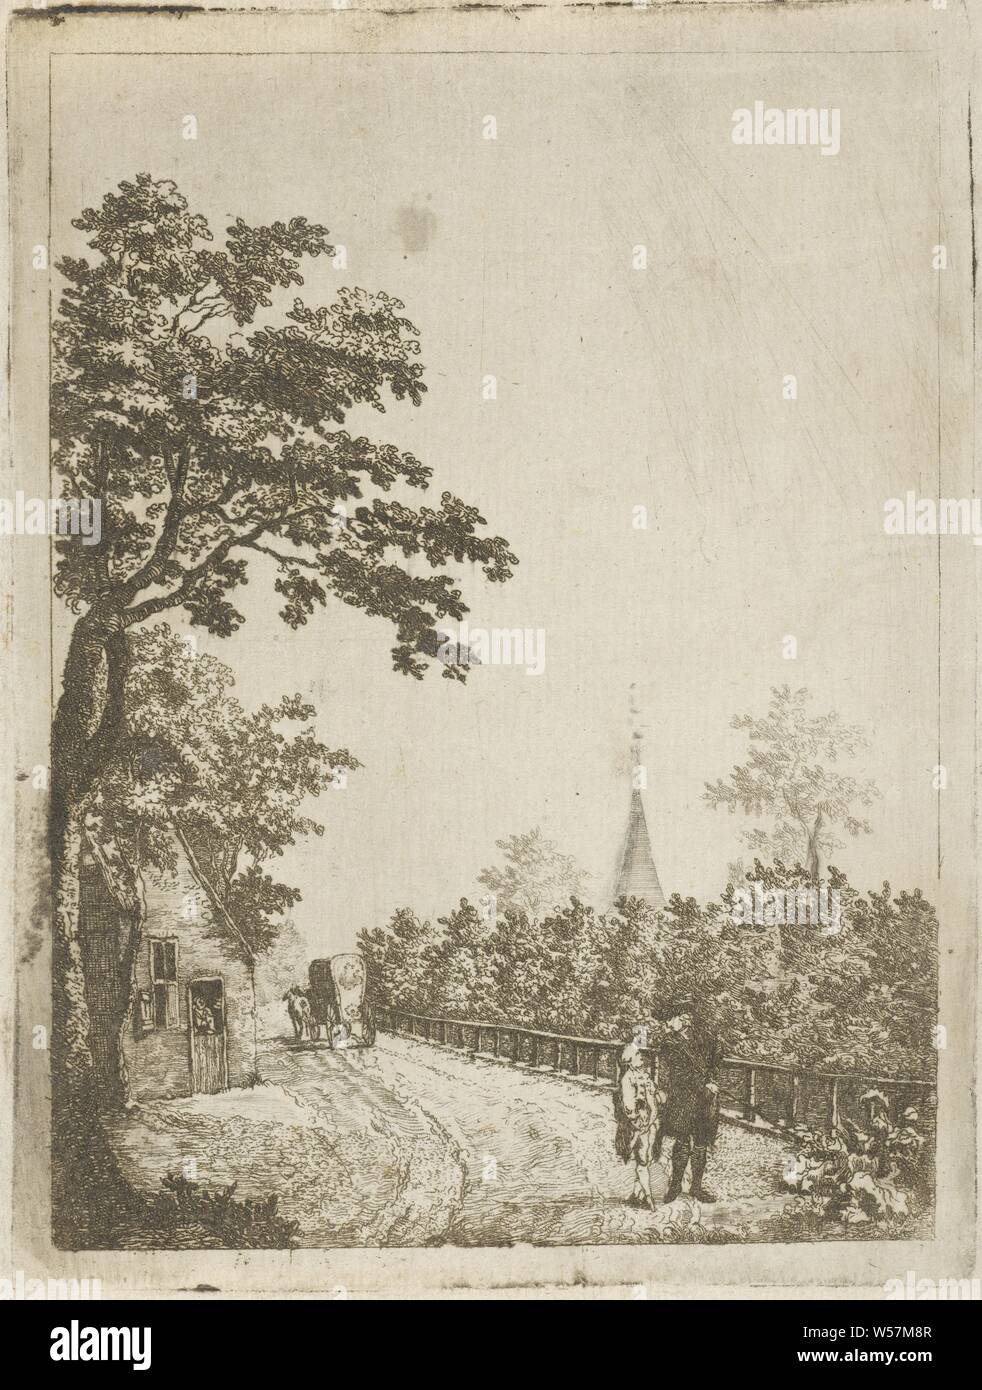 Country road, Country road with walking figures and a farmstead, where a woman leans over the bottom door. In the background a wagon with two horses and on the right a church tower protrudes above the trees, road, path, four-wheeled vehicle drawn by two animals, parts of church exterior and annexes, Johan Antonie Kaldenbach, 1770 - 1786, paper, etching, h 174 mm × w 130 mm Stock Photo